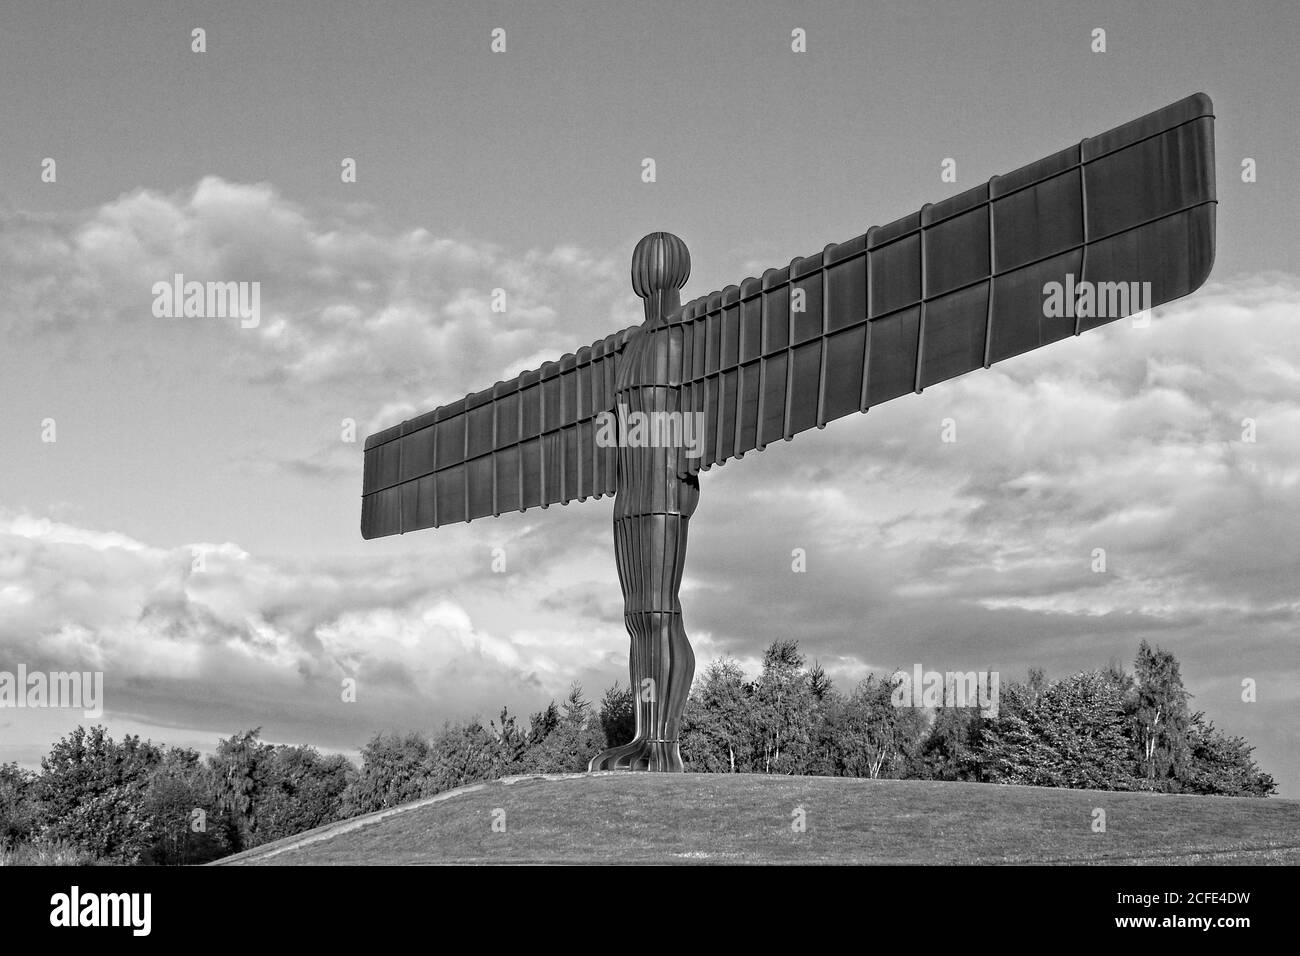 The landmark iconic Angel of the North statue in Gateshead, Tyne and Wear. Captured in golden light to contract the rust colour against cloudy blue sk Stock Photo